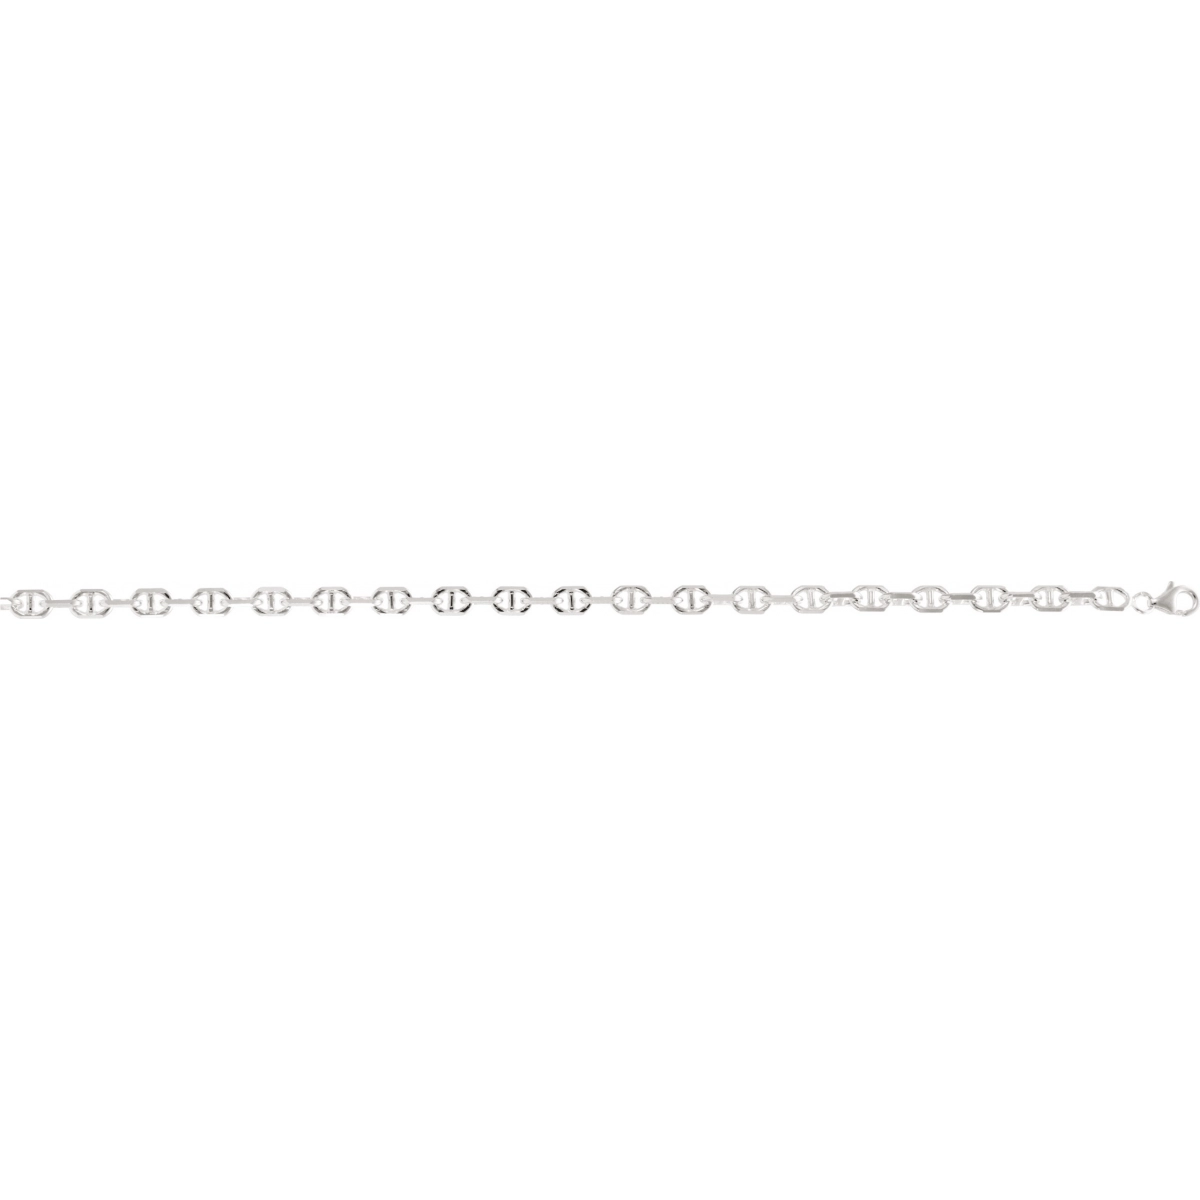 Necklace 'anchor link chain' rh925 Silver - Size: 50  Lua Blanca  301183C.50